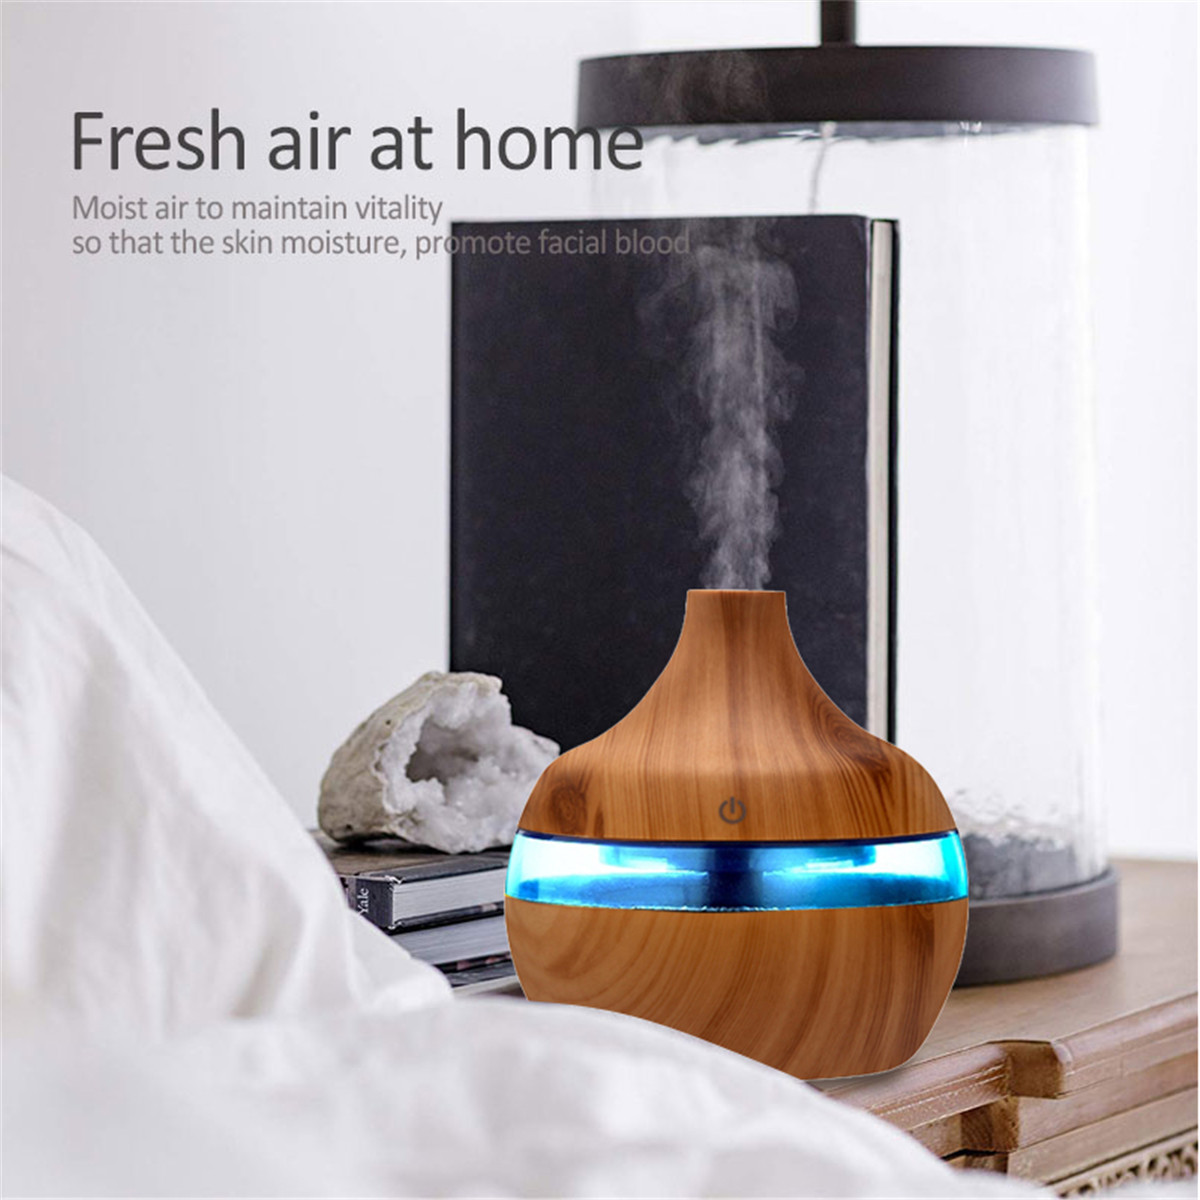 300ml-Electric-Ultrasonic-Air-Mist-Humidifier-Purifier-Aroma-Diffuser-7-Colors-LED-USB-Charging-for--1761154-5